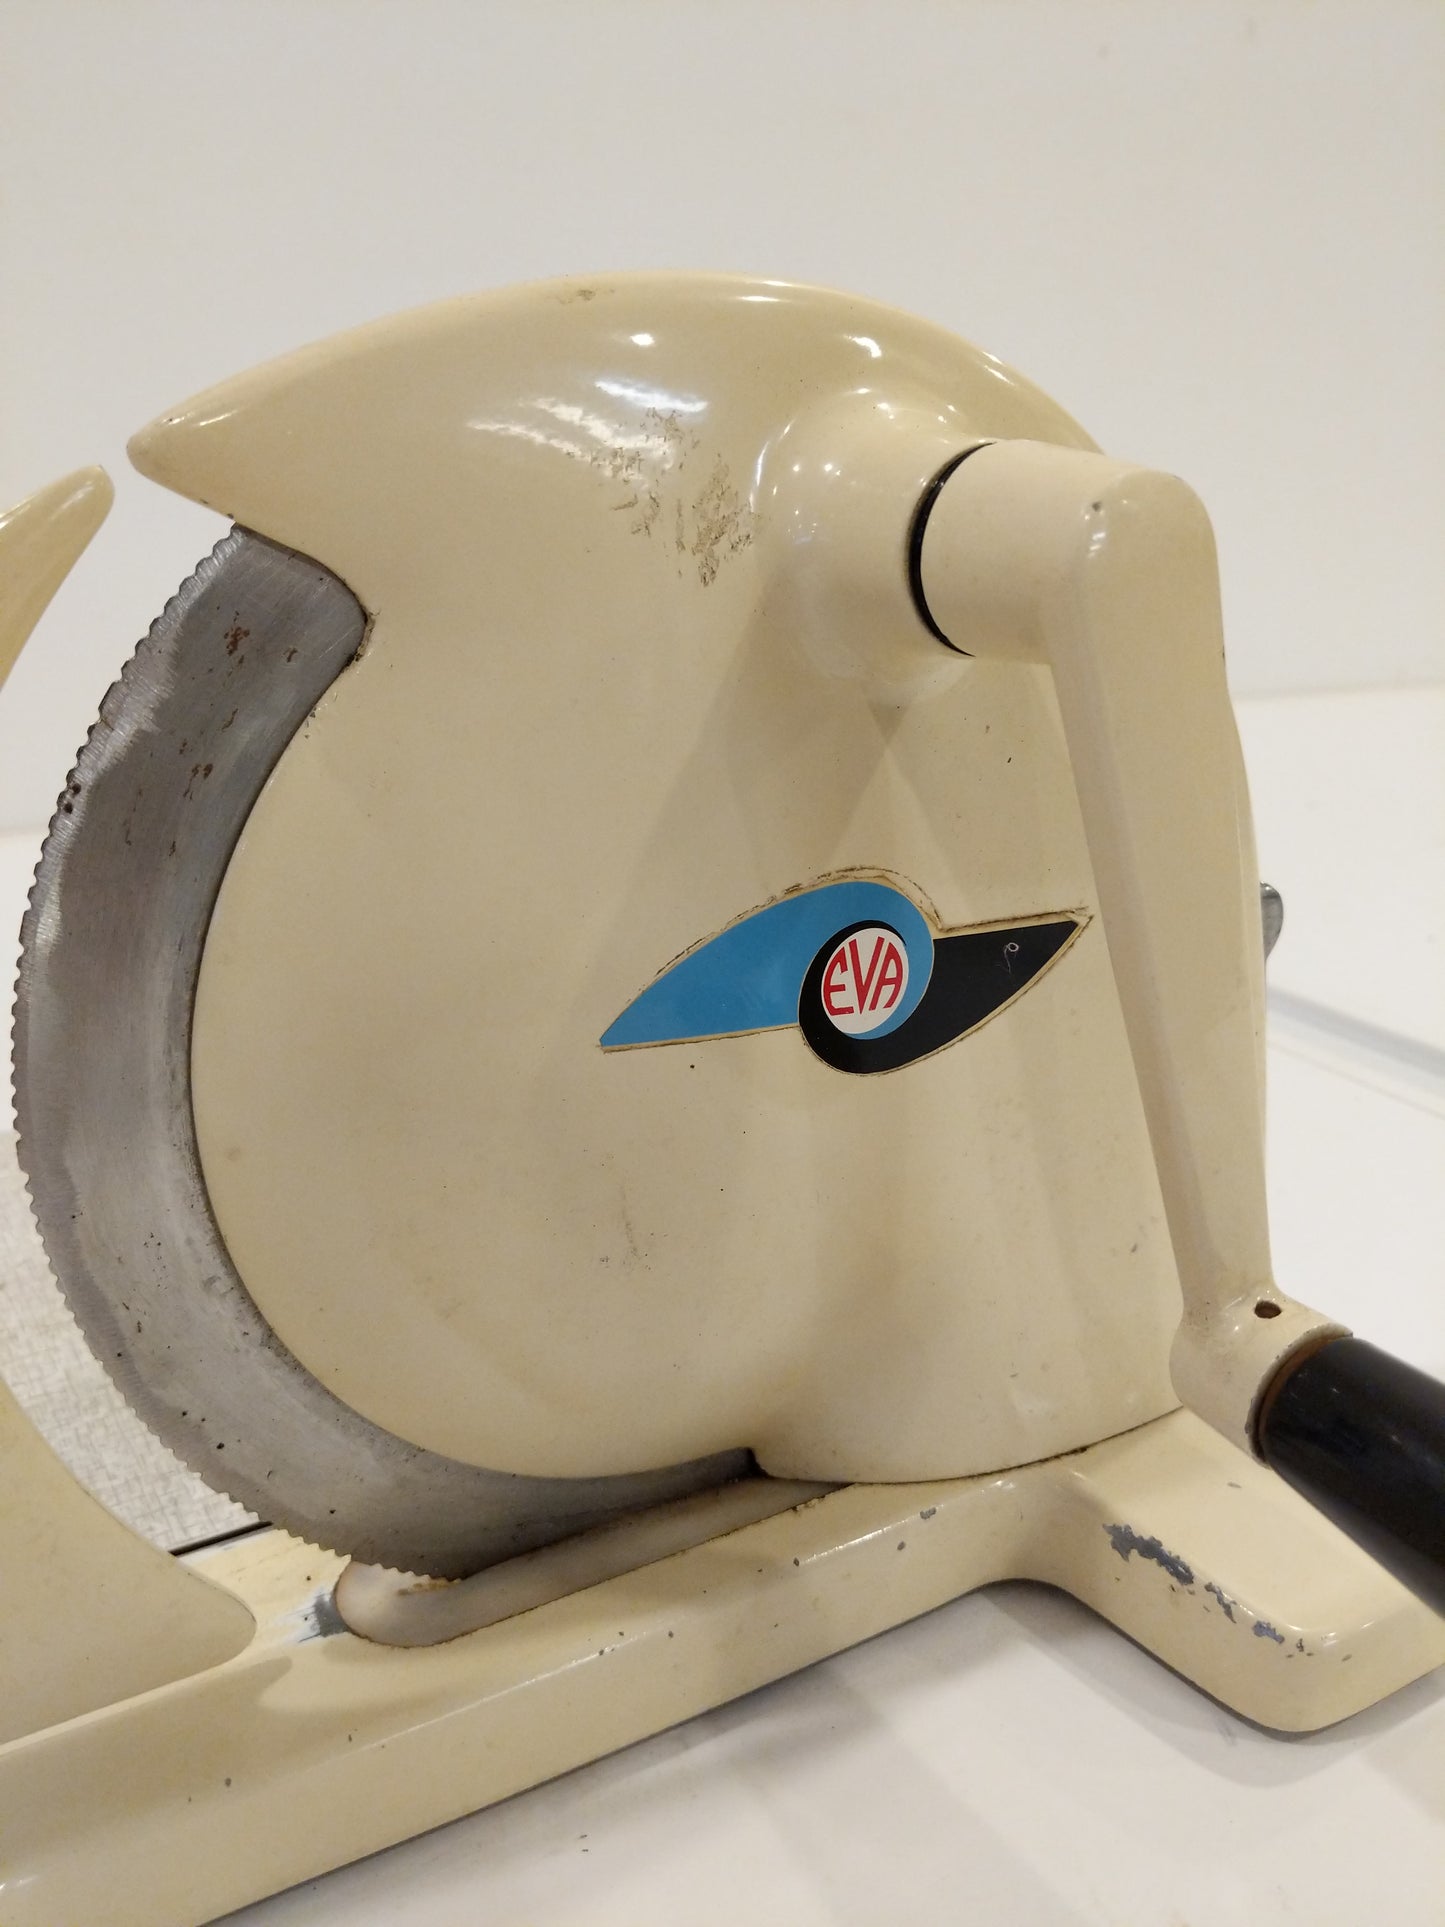 Vintage Eva Bread, Cheese, and Meat Slicer